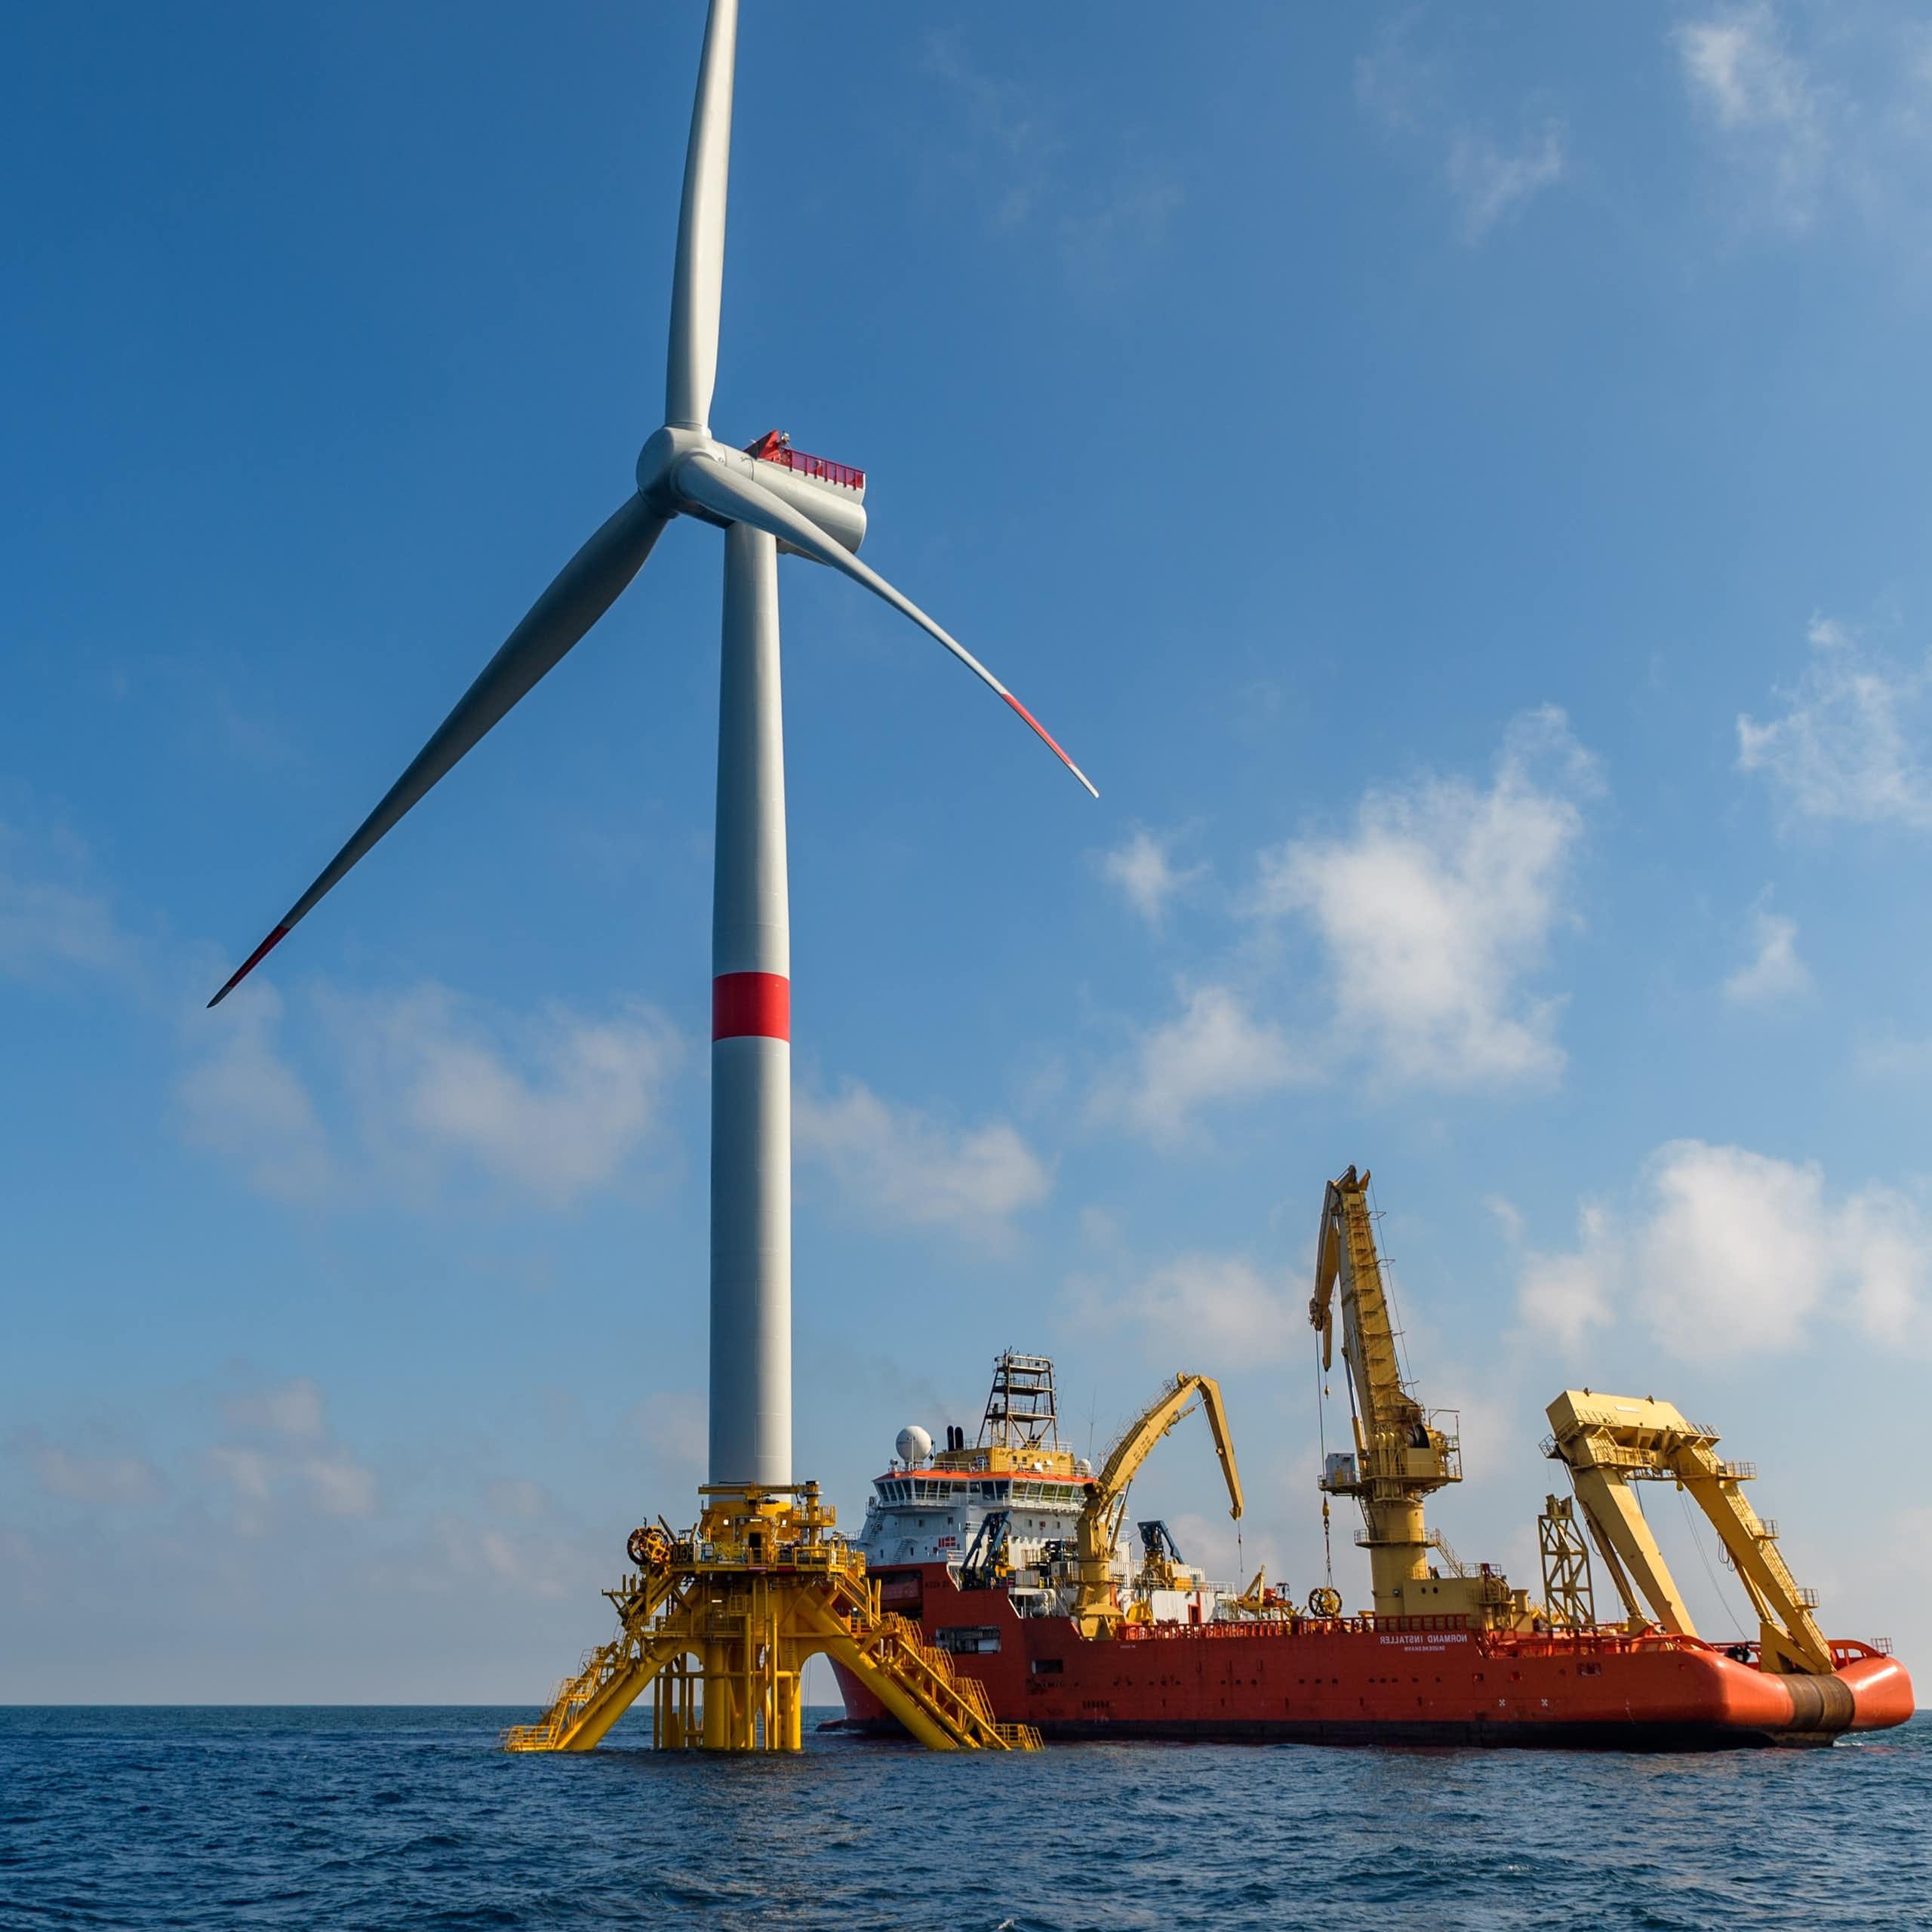 Offshore wind turbine and installation boat